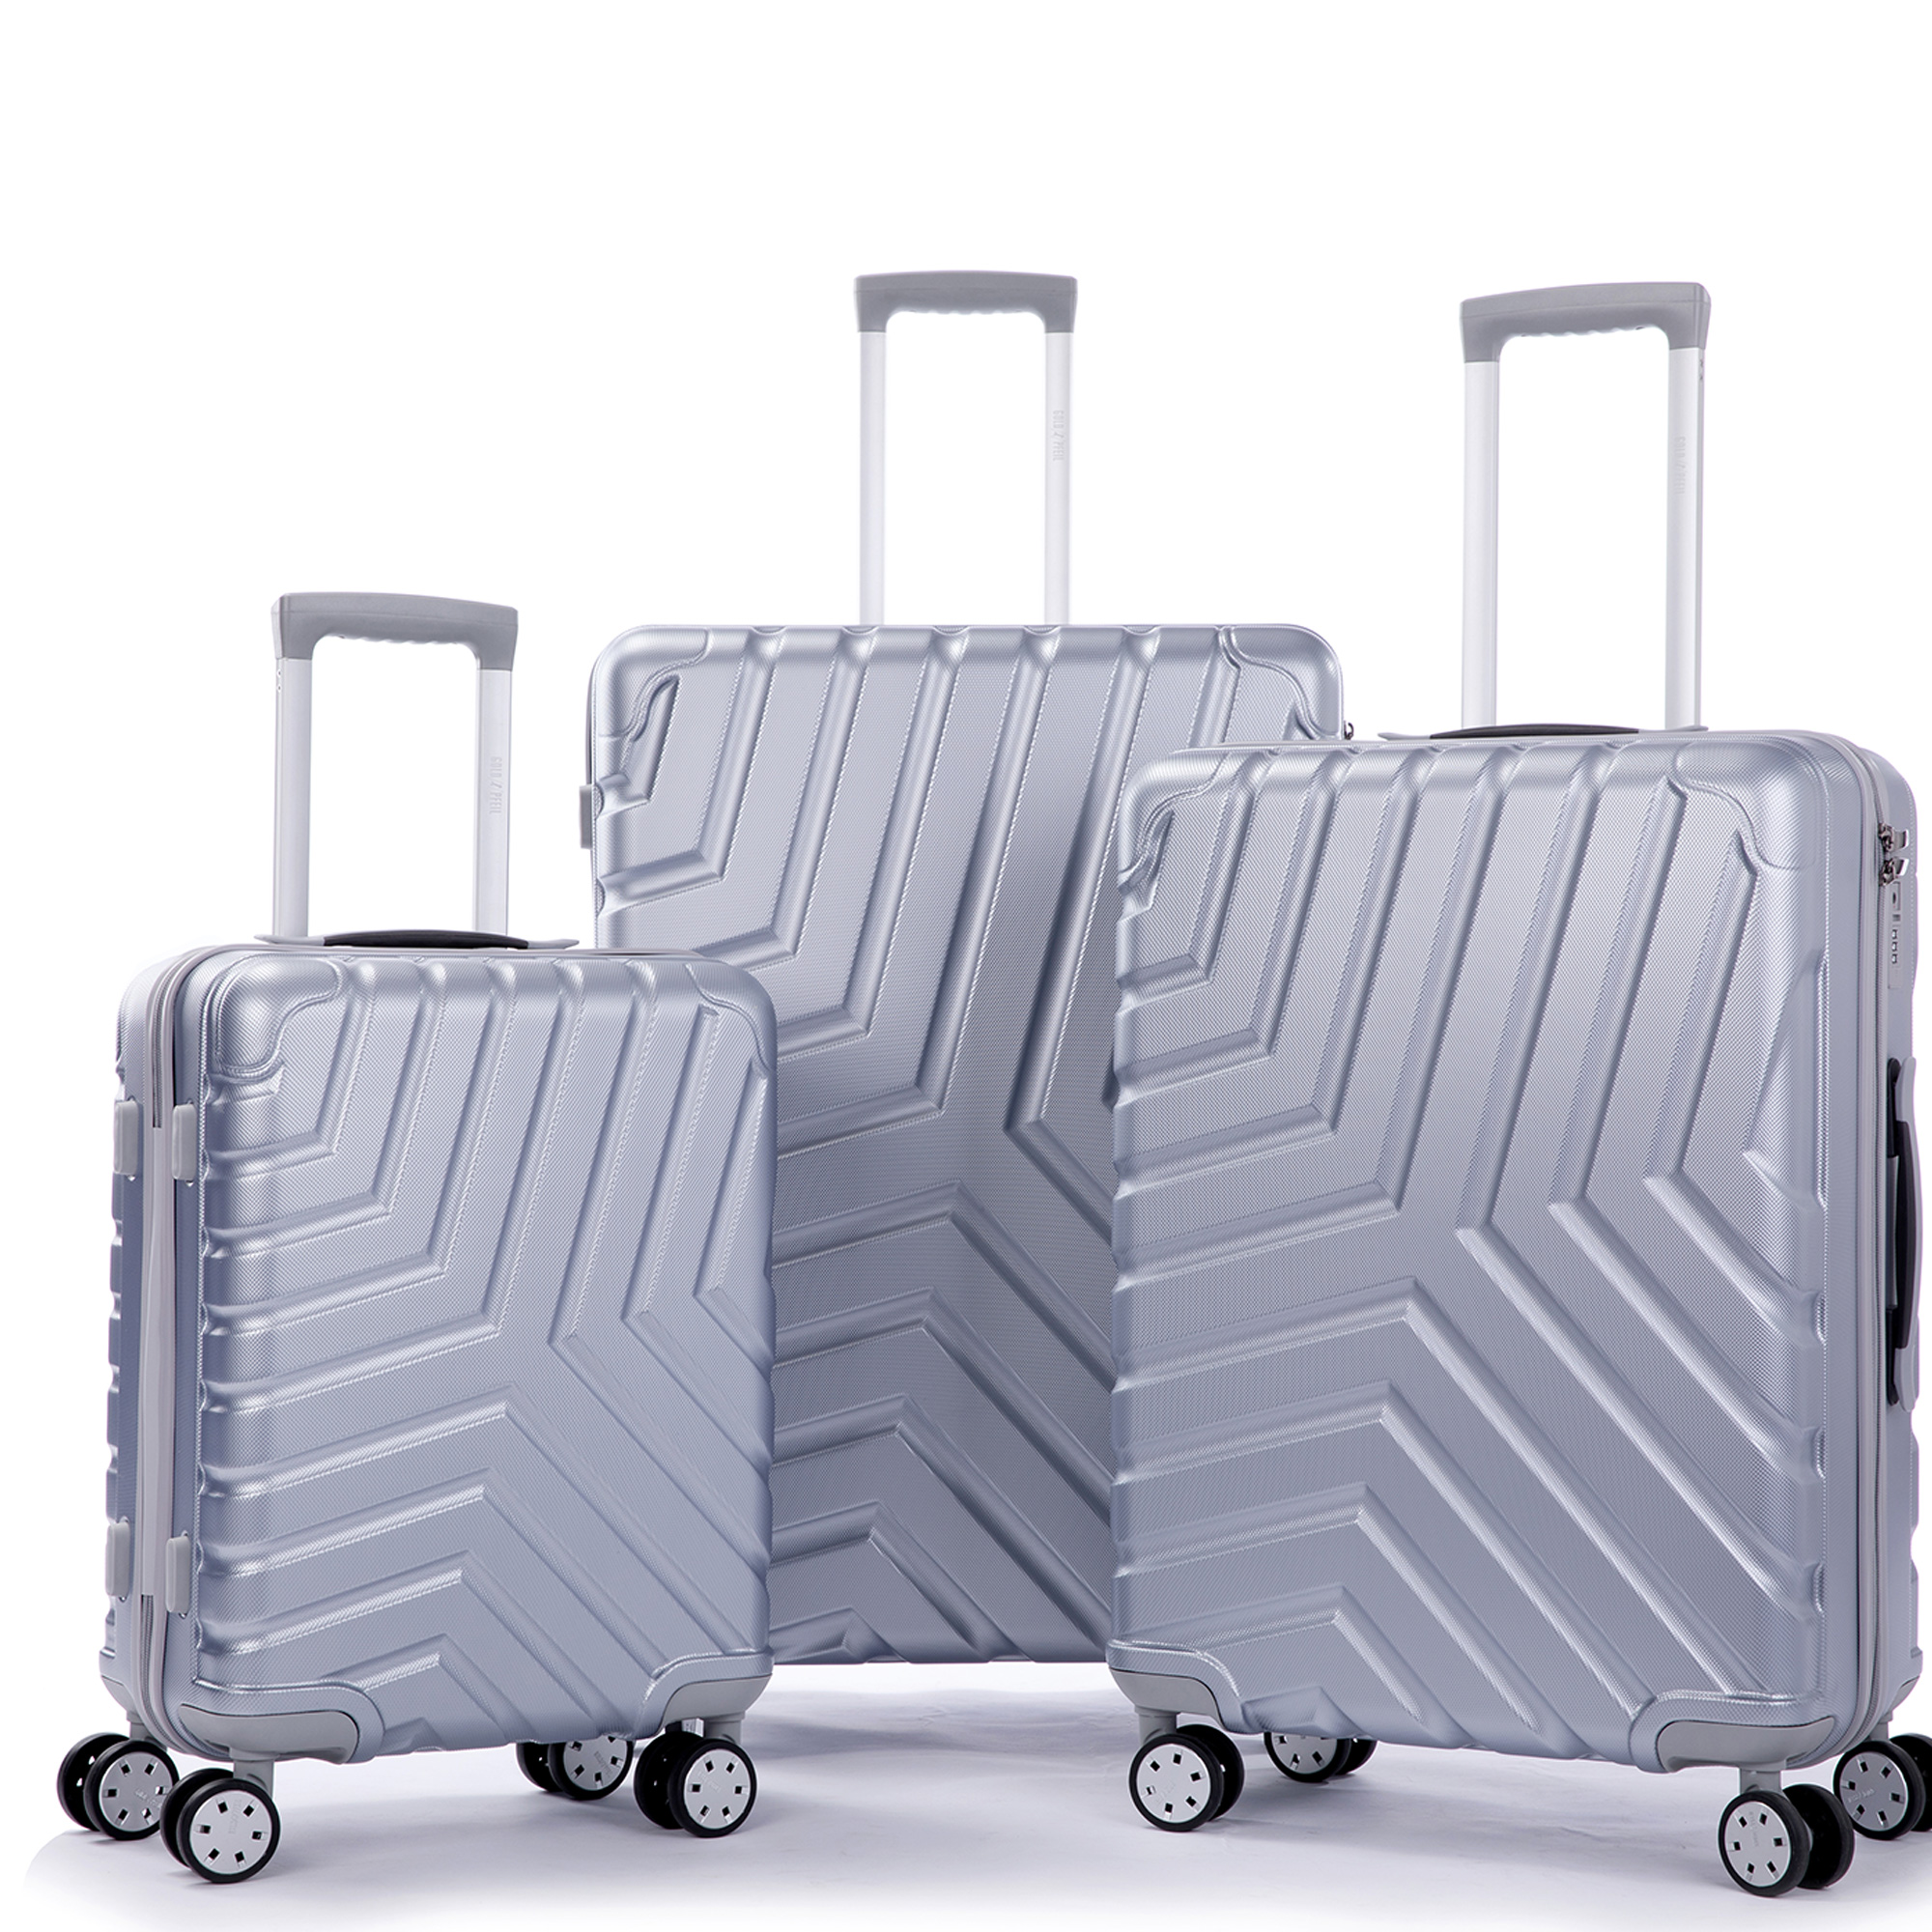 100% PC Suitcase Hardside Luggage Sets 3 Pieces with Double Spinner Wheels TSA Lock Silver-Boyel Living